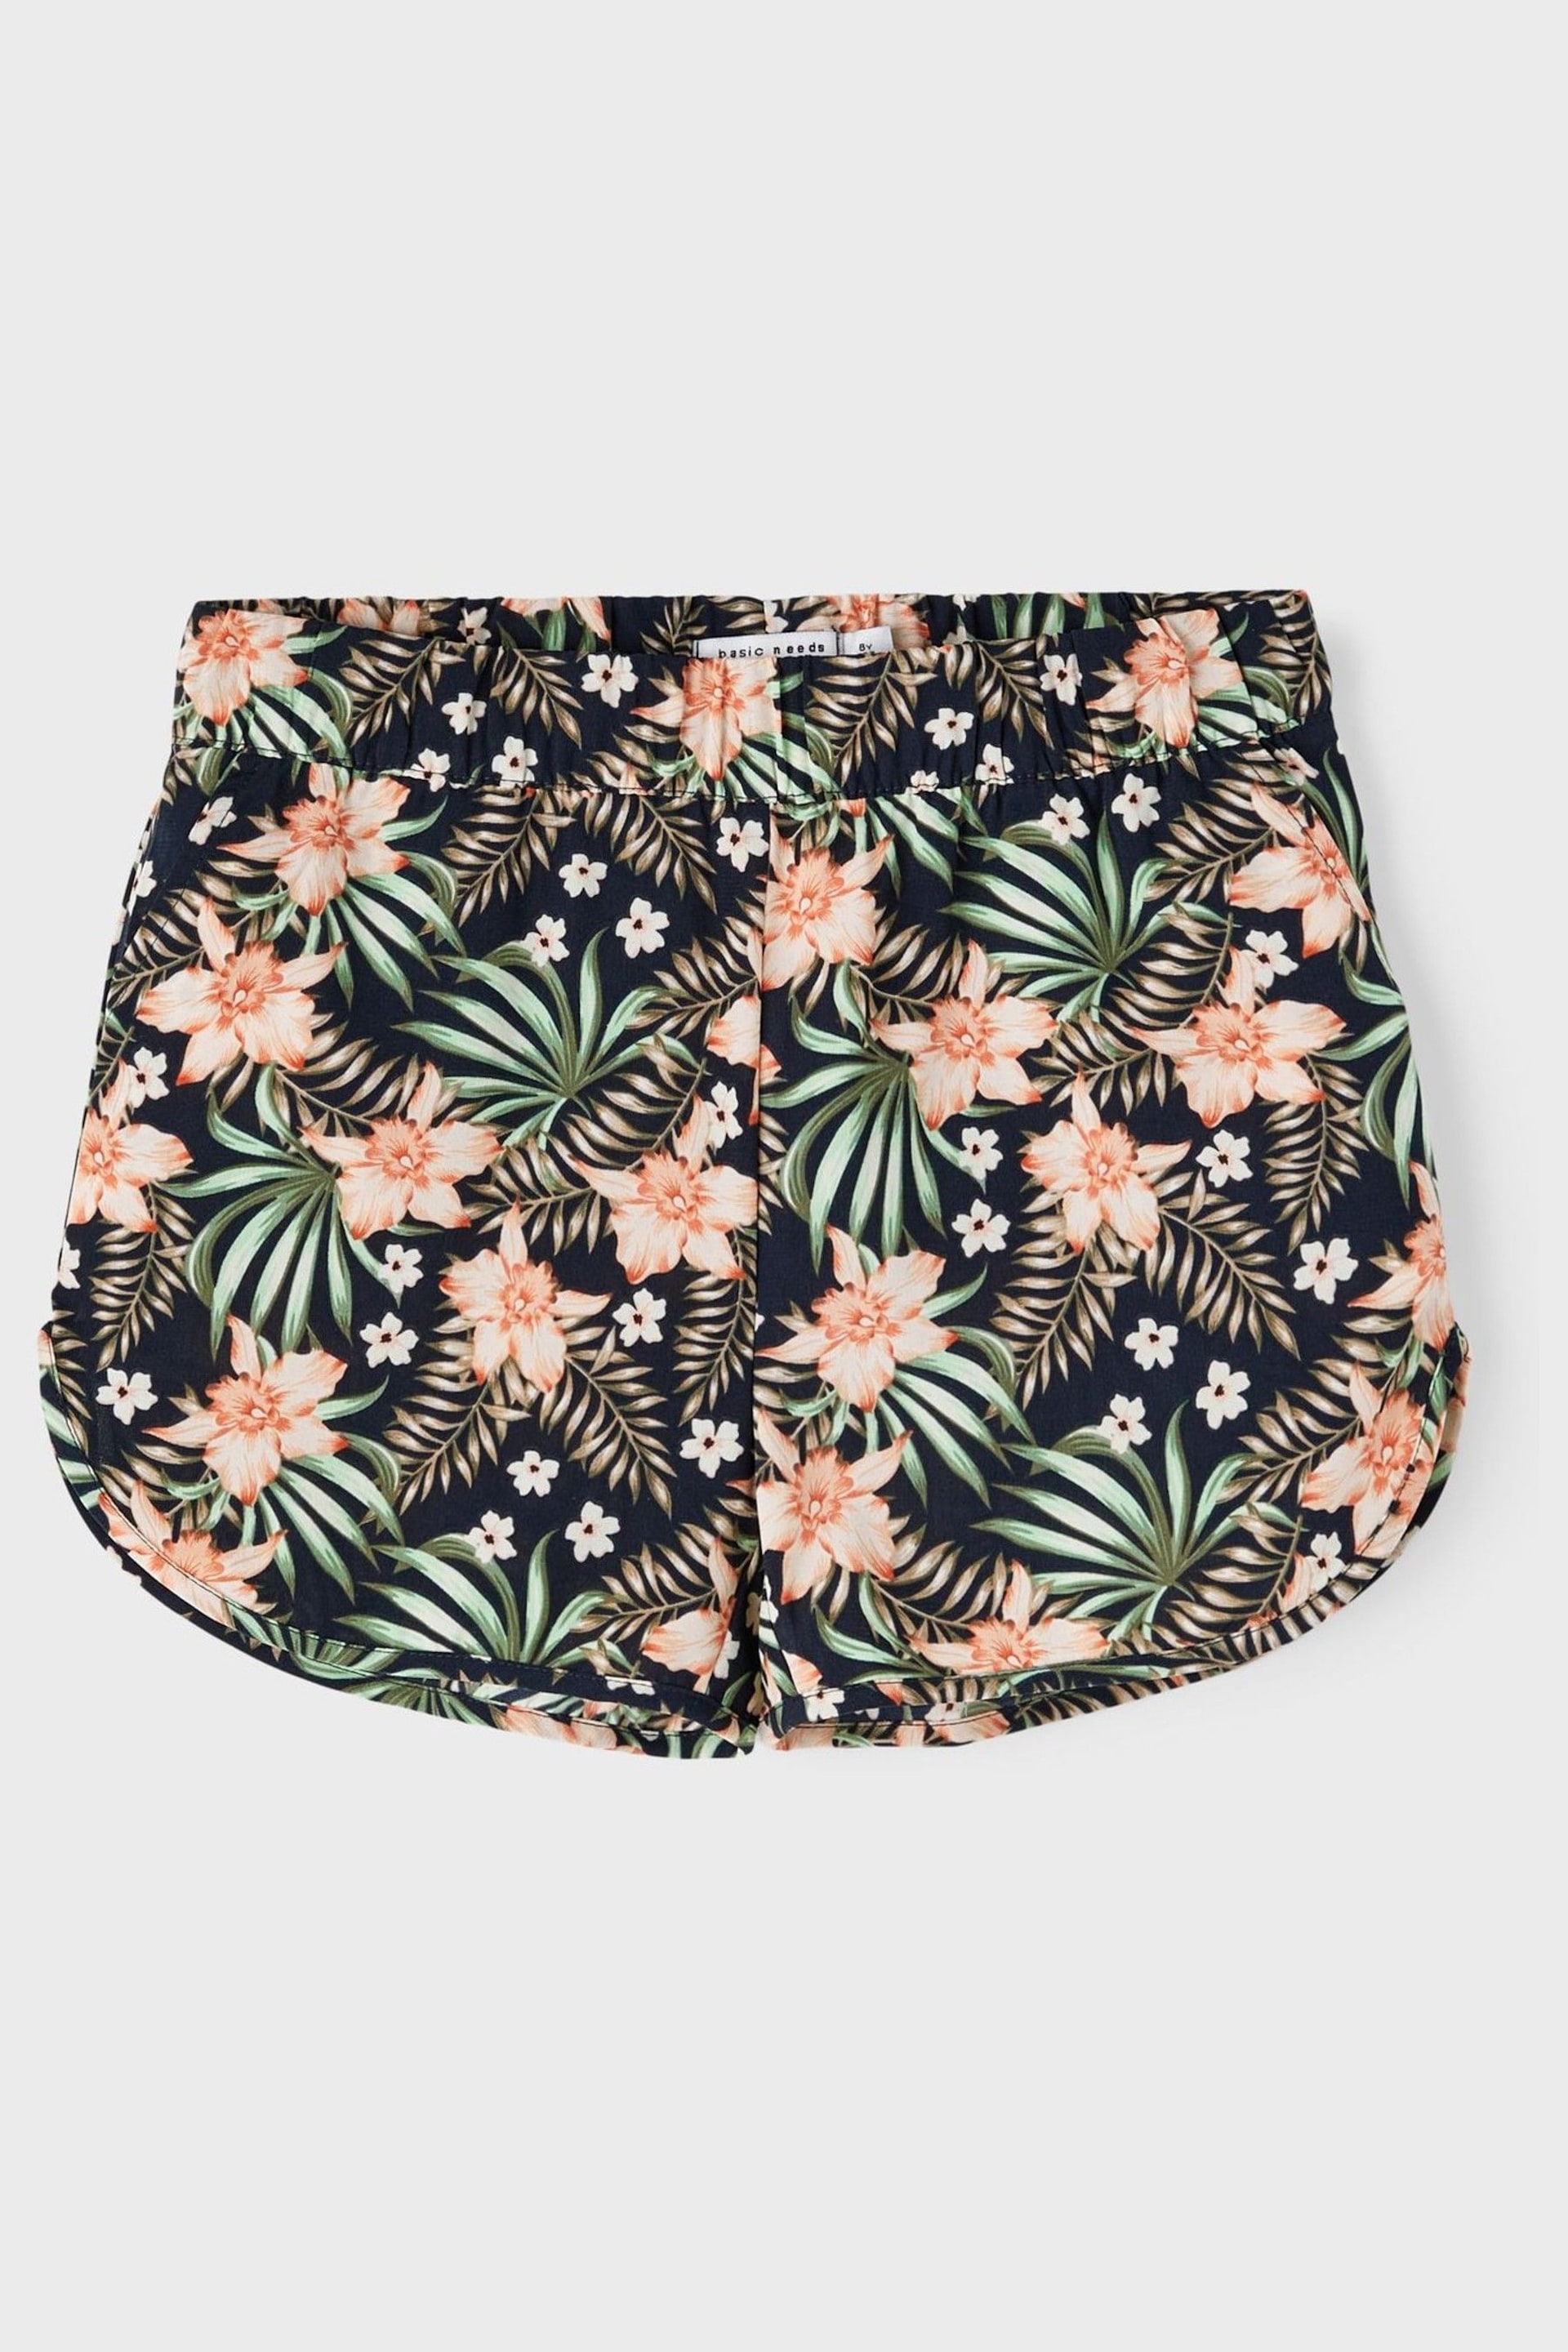 Name It blue Elasticated Woven Shorts - Image 1 of 3